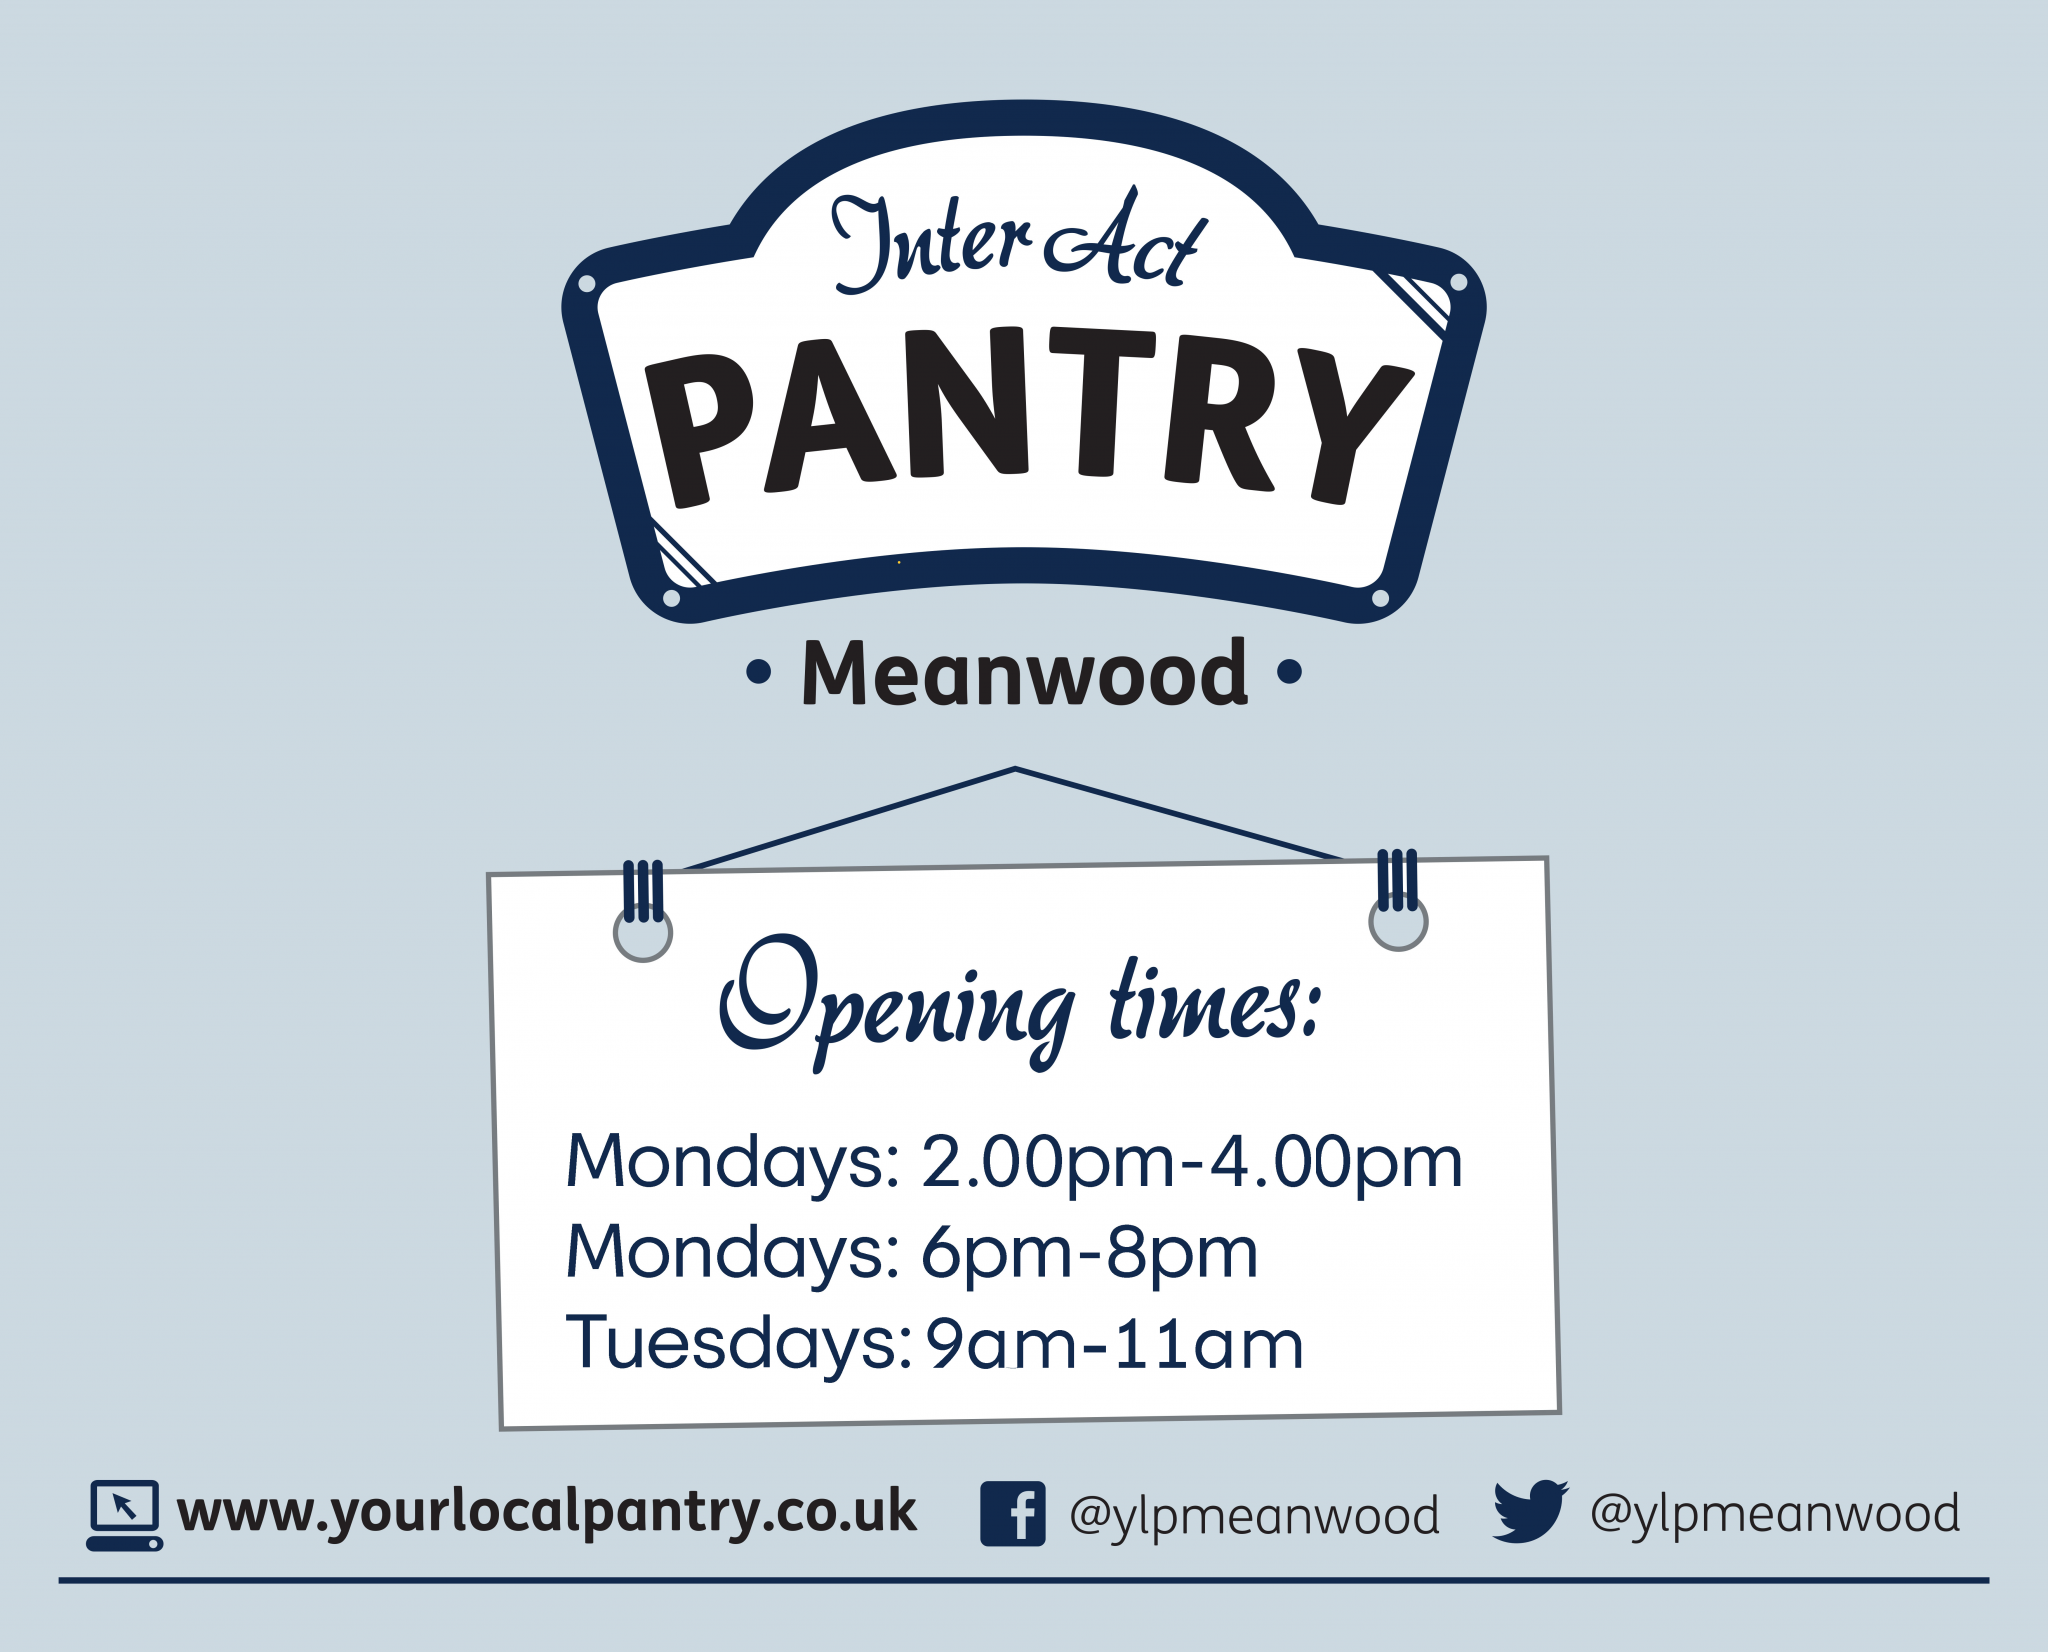 Sign showing opening times Monday 2.00pm-4.00pm and 6-8pm and Tuesdays 9am to 11am